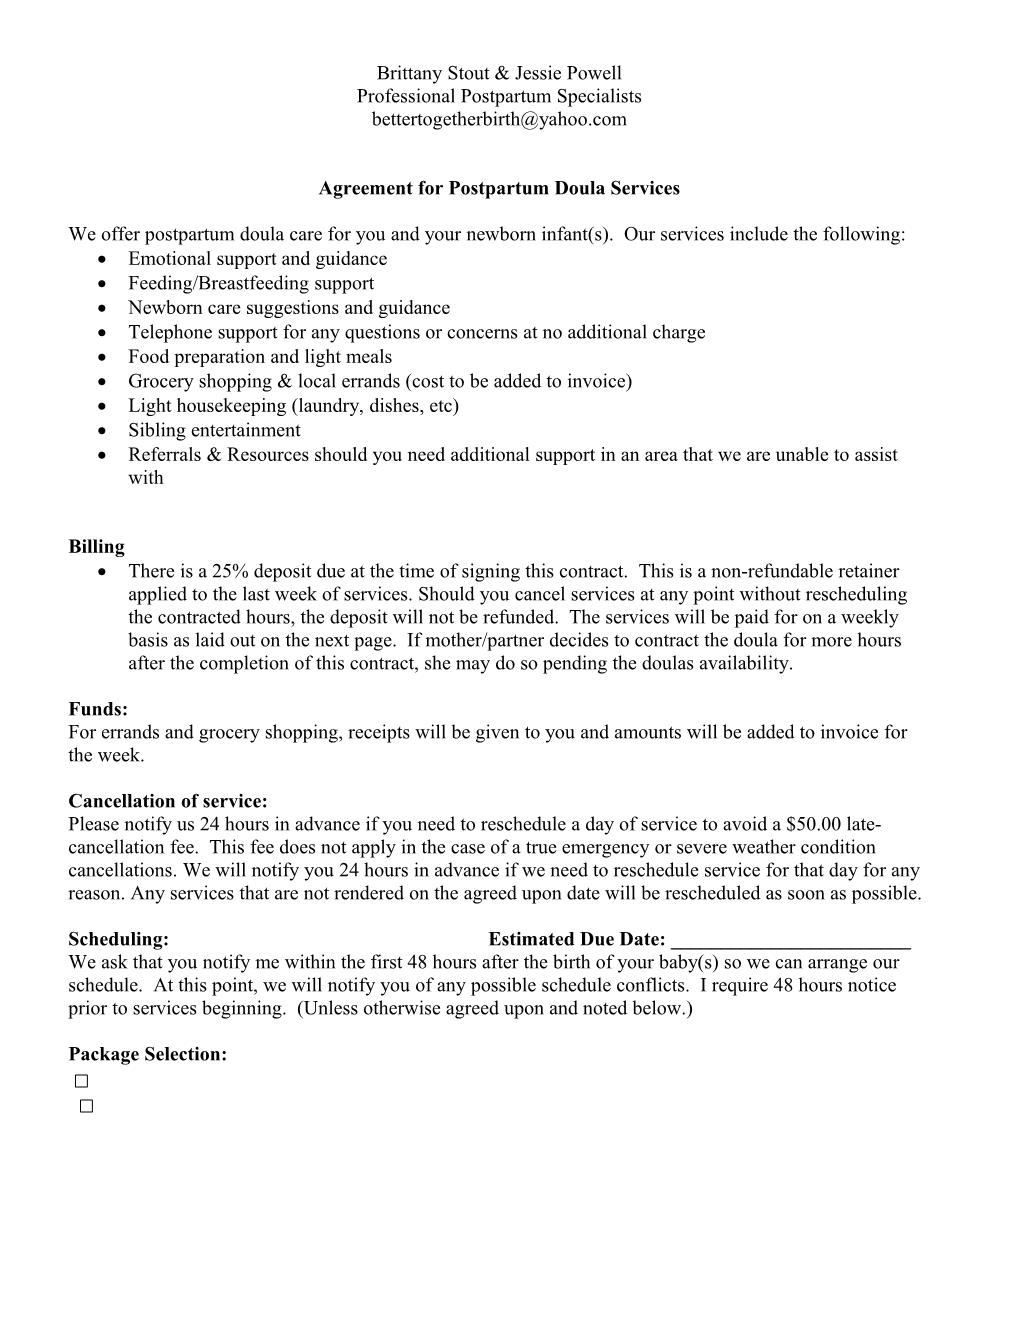 Agreement for Postpartum Doula Services